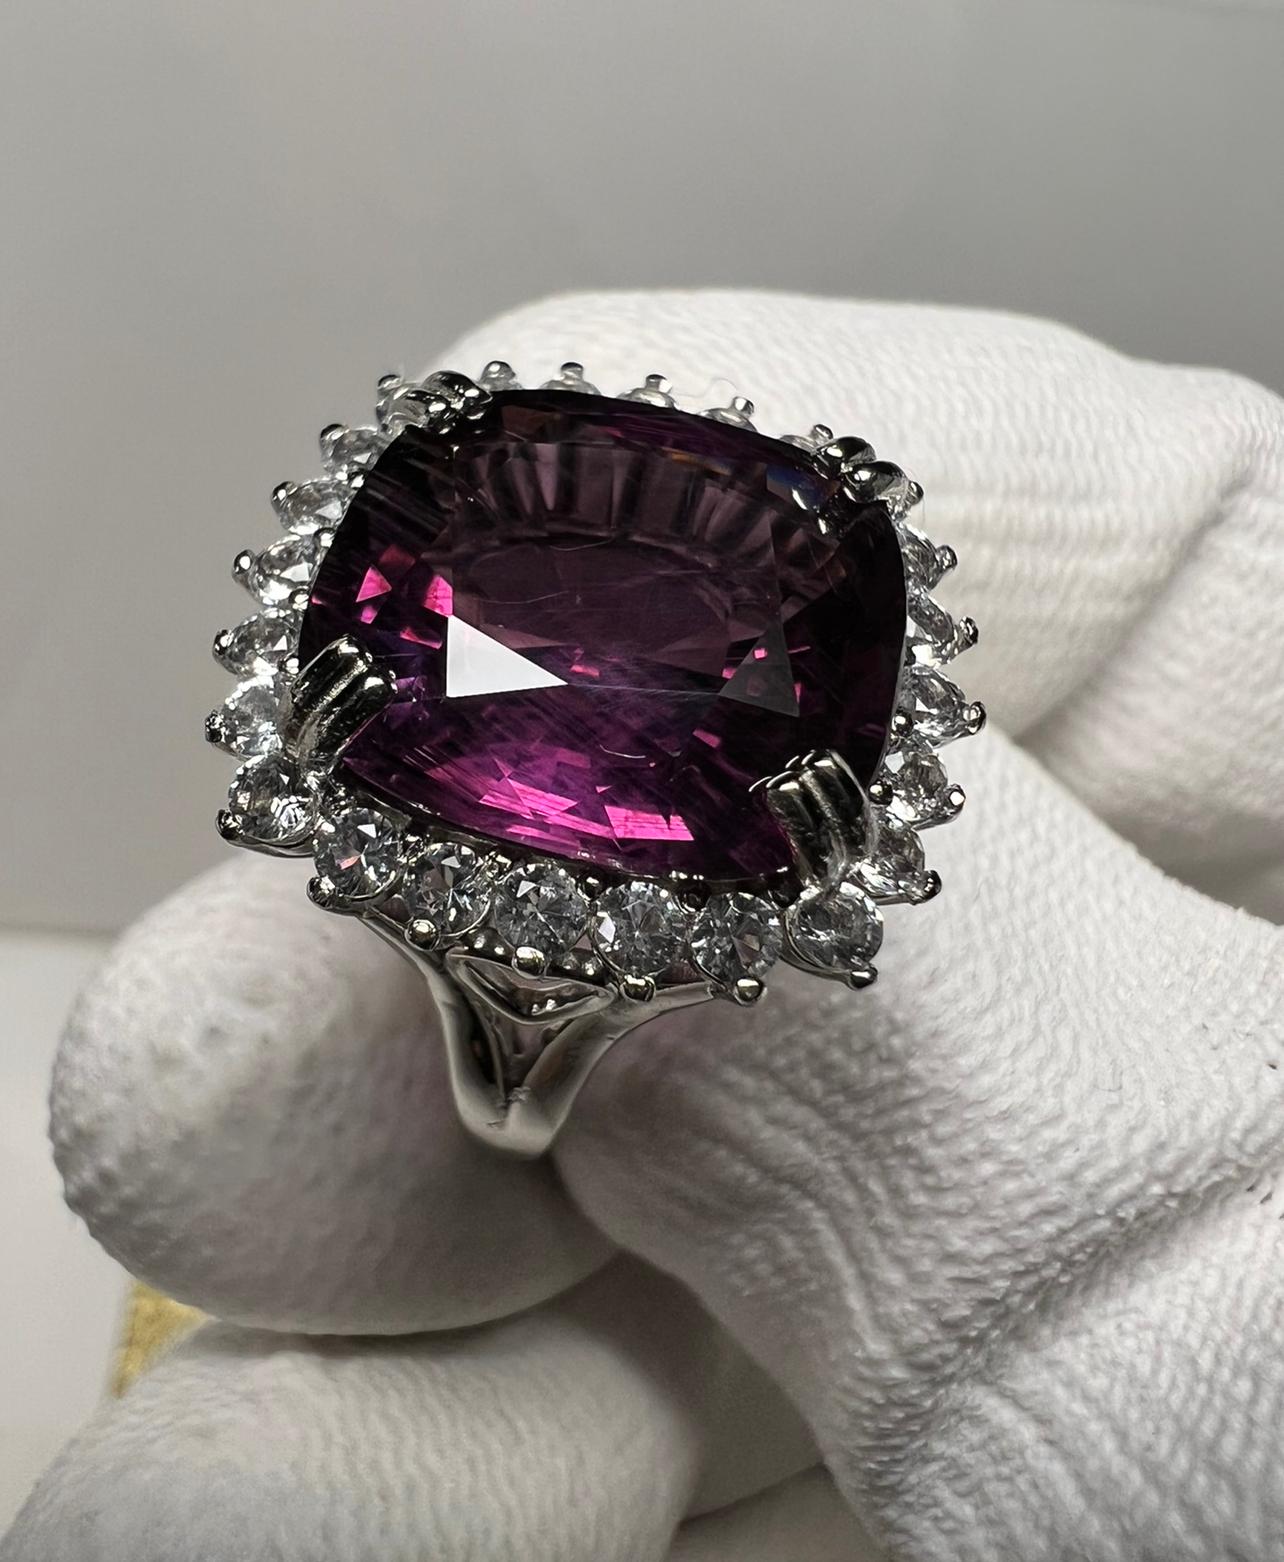 Rare 11.81 Carat Pink Purple Spinel Coctail Ring, Gemstone is GIA Certified 1